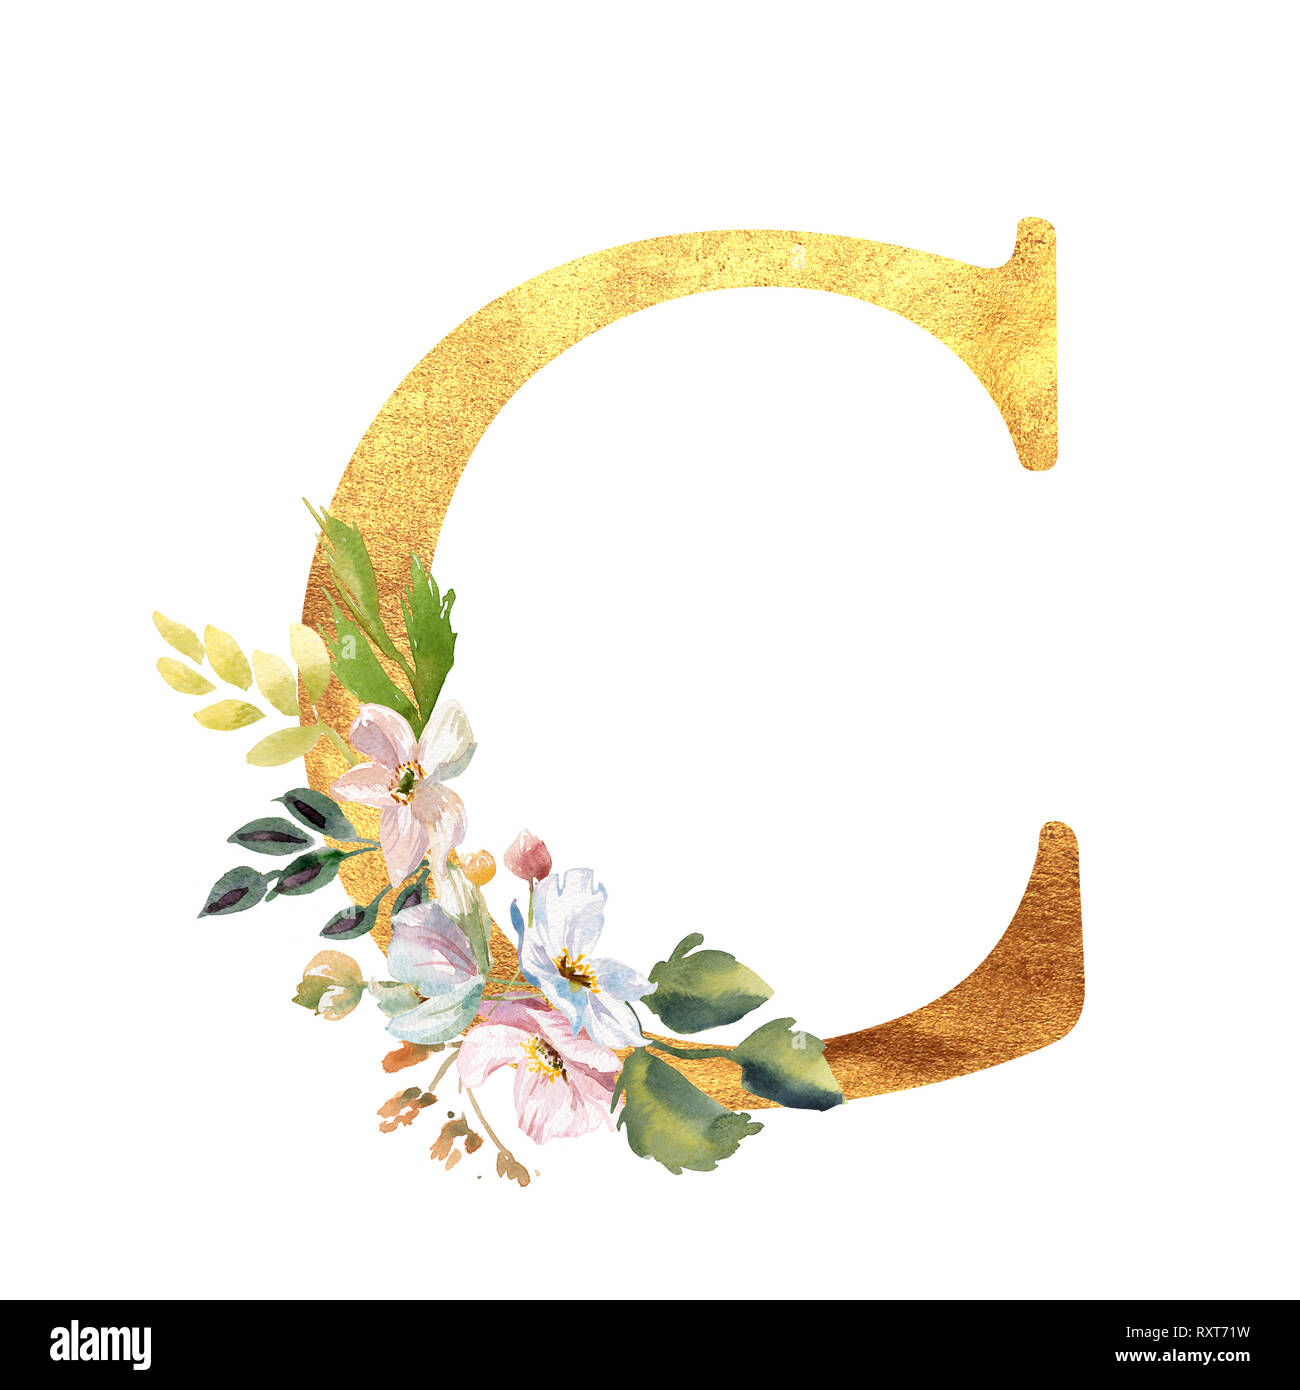 Romantic gold letter C with drawn watercolor flowers. Elegant emblem for  book design, brand name, wedding invitation thanks card Stock Photo - Alamy